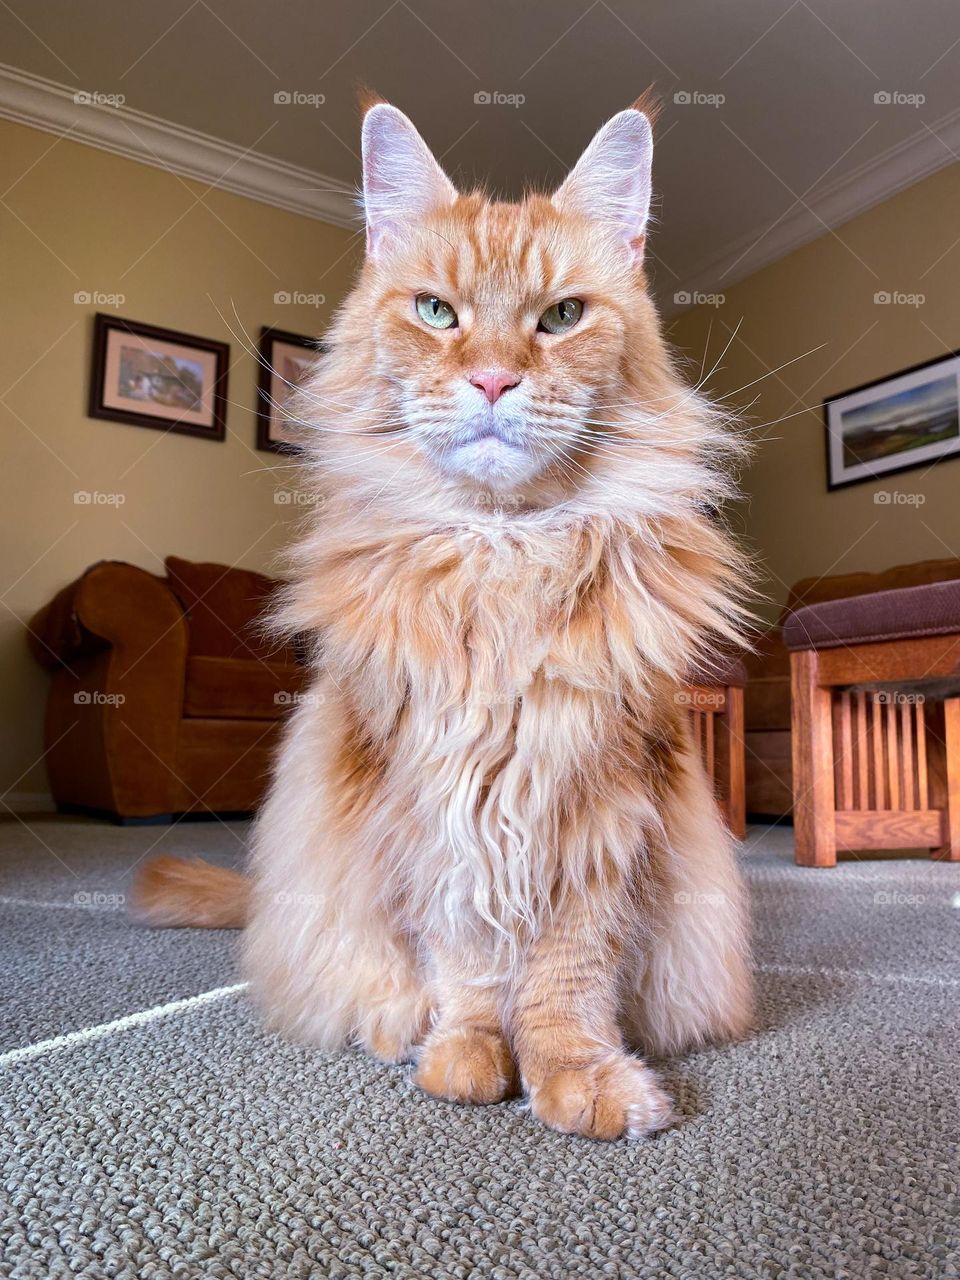 Low angle view of a Maine Coon cat 